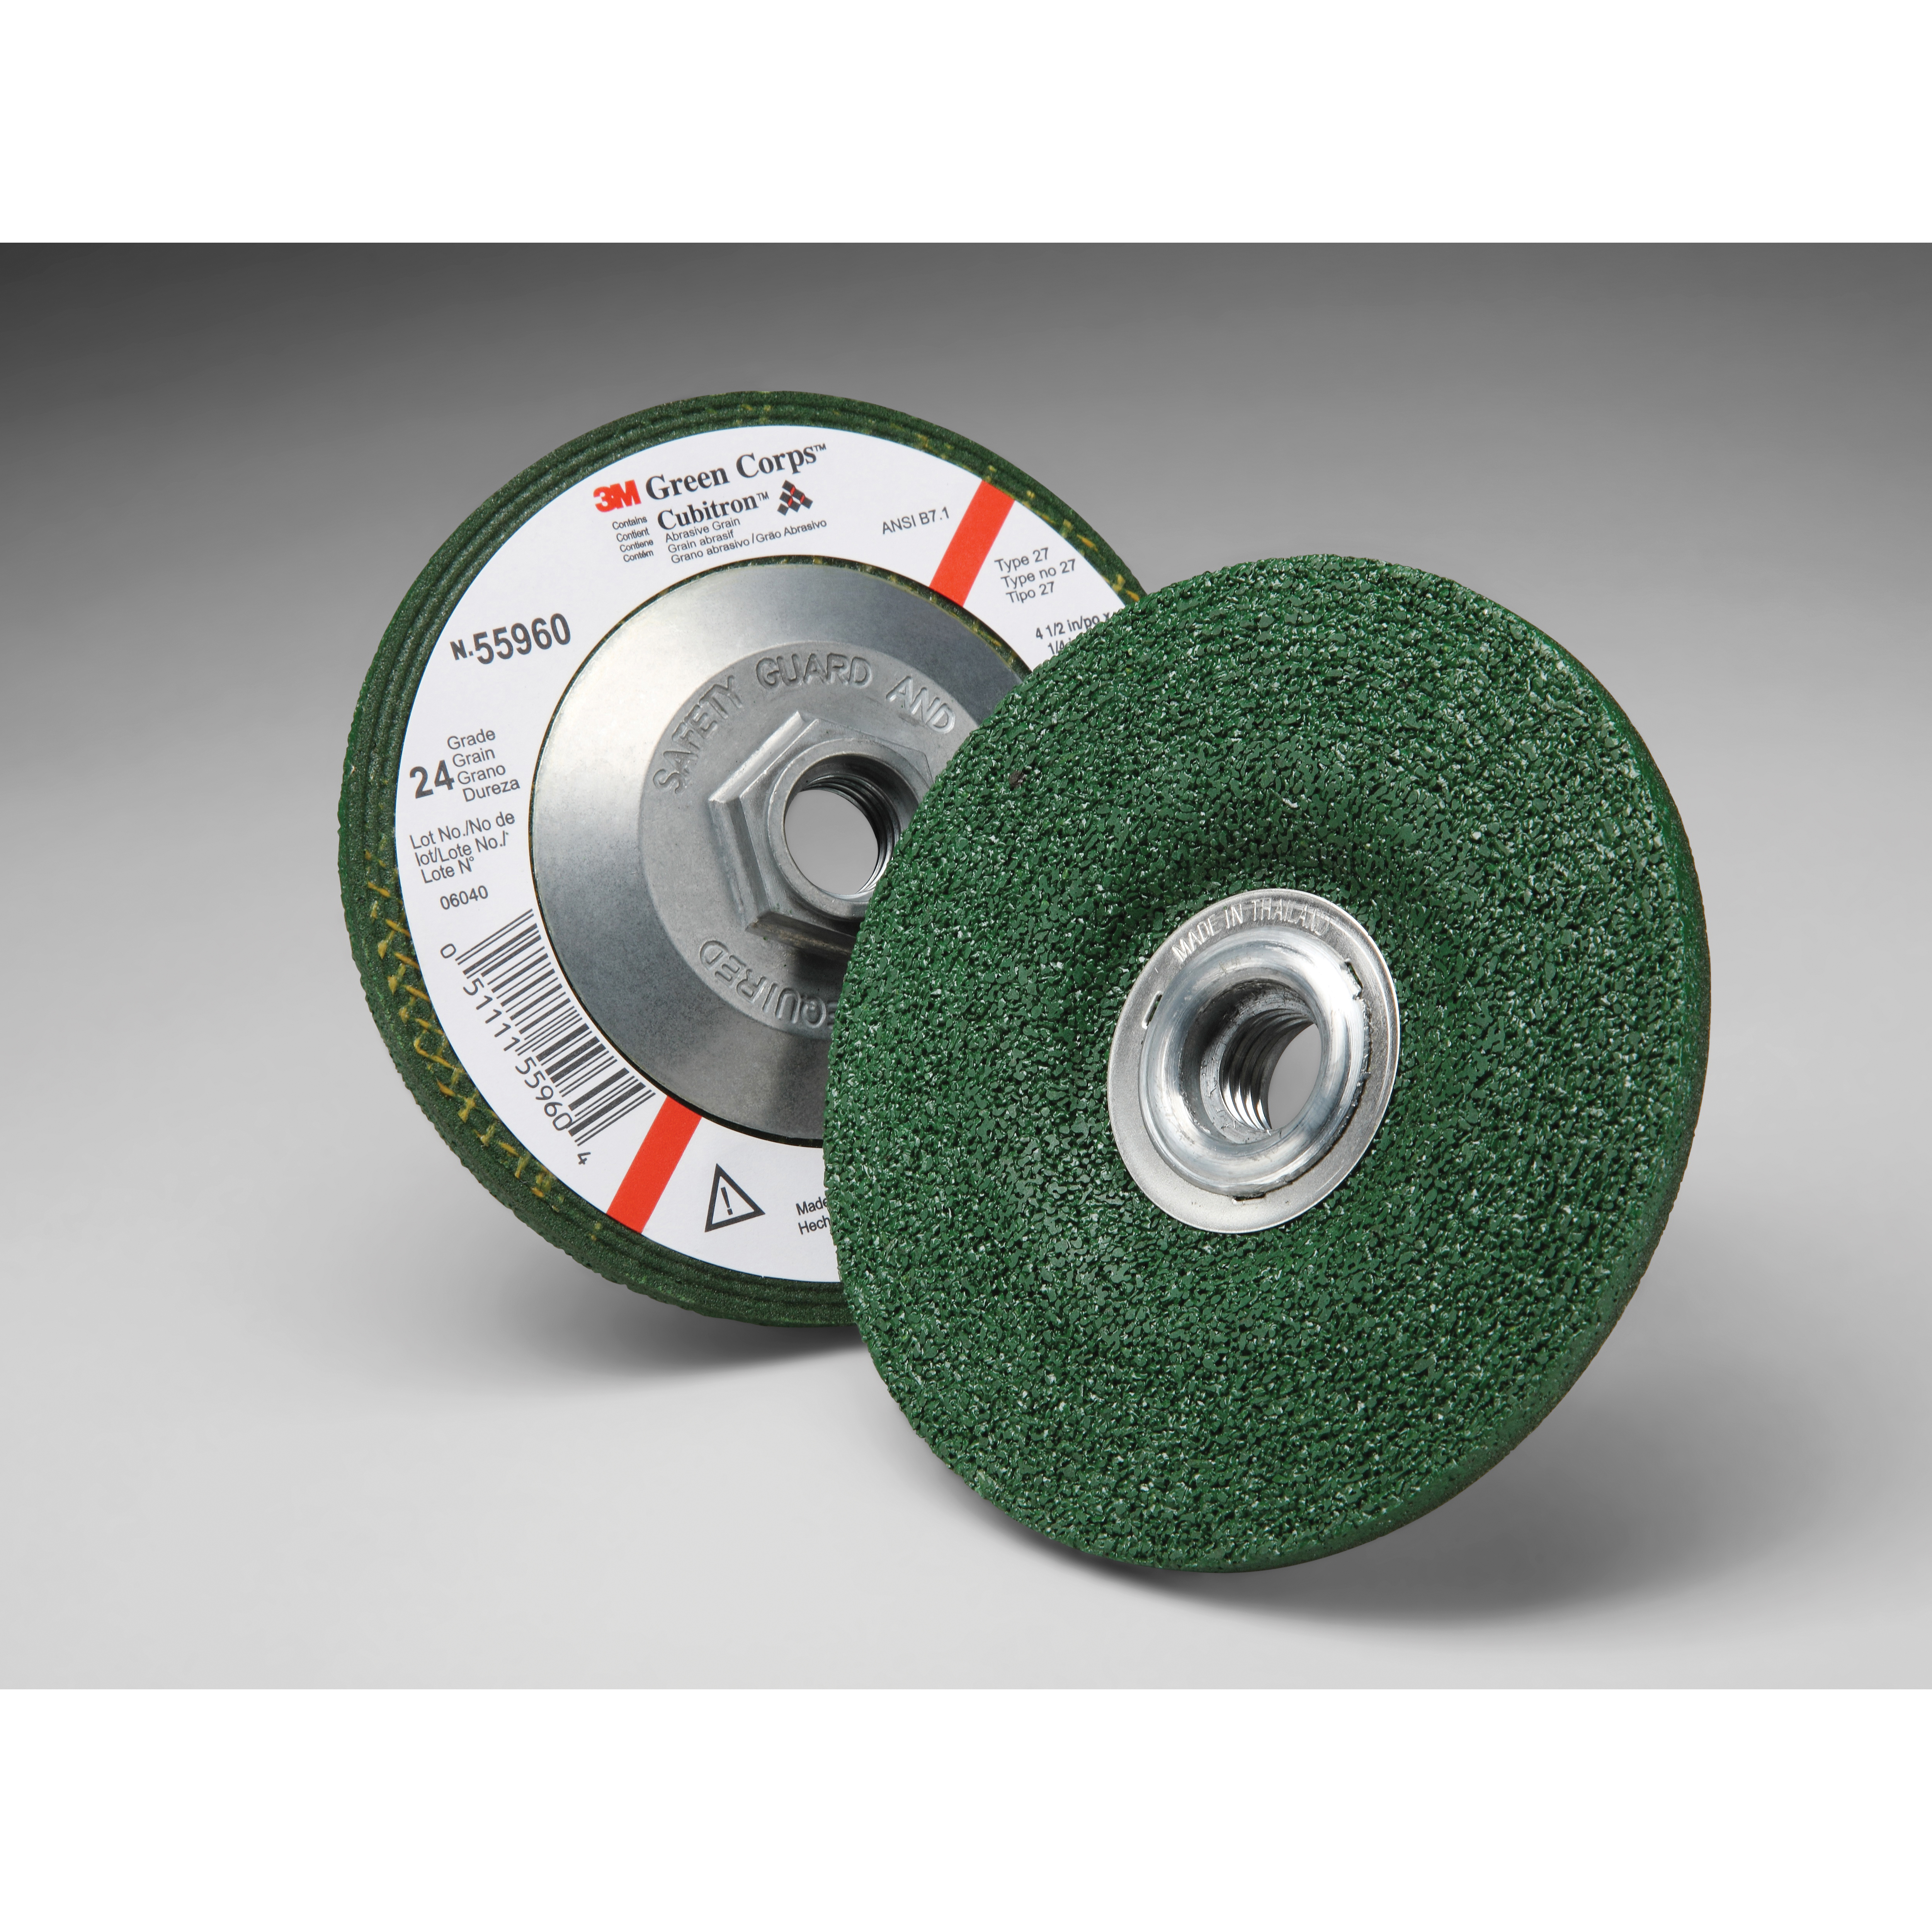 Green Corps™ 051111-50440 Flexible Grinding Wheel, 4-1/2 in Dia x 1/8 in THK, 7/8 in Center Hole, 36 Grit, Ceramic Abrasive